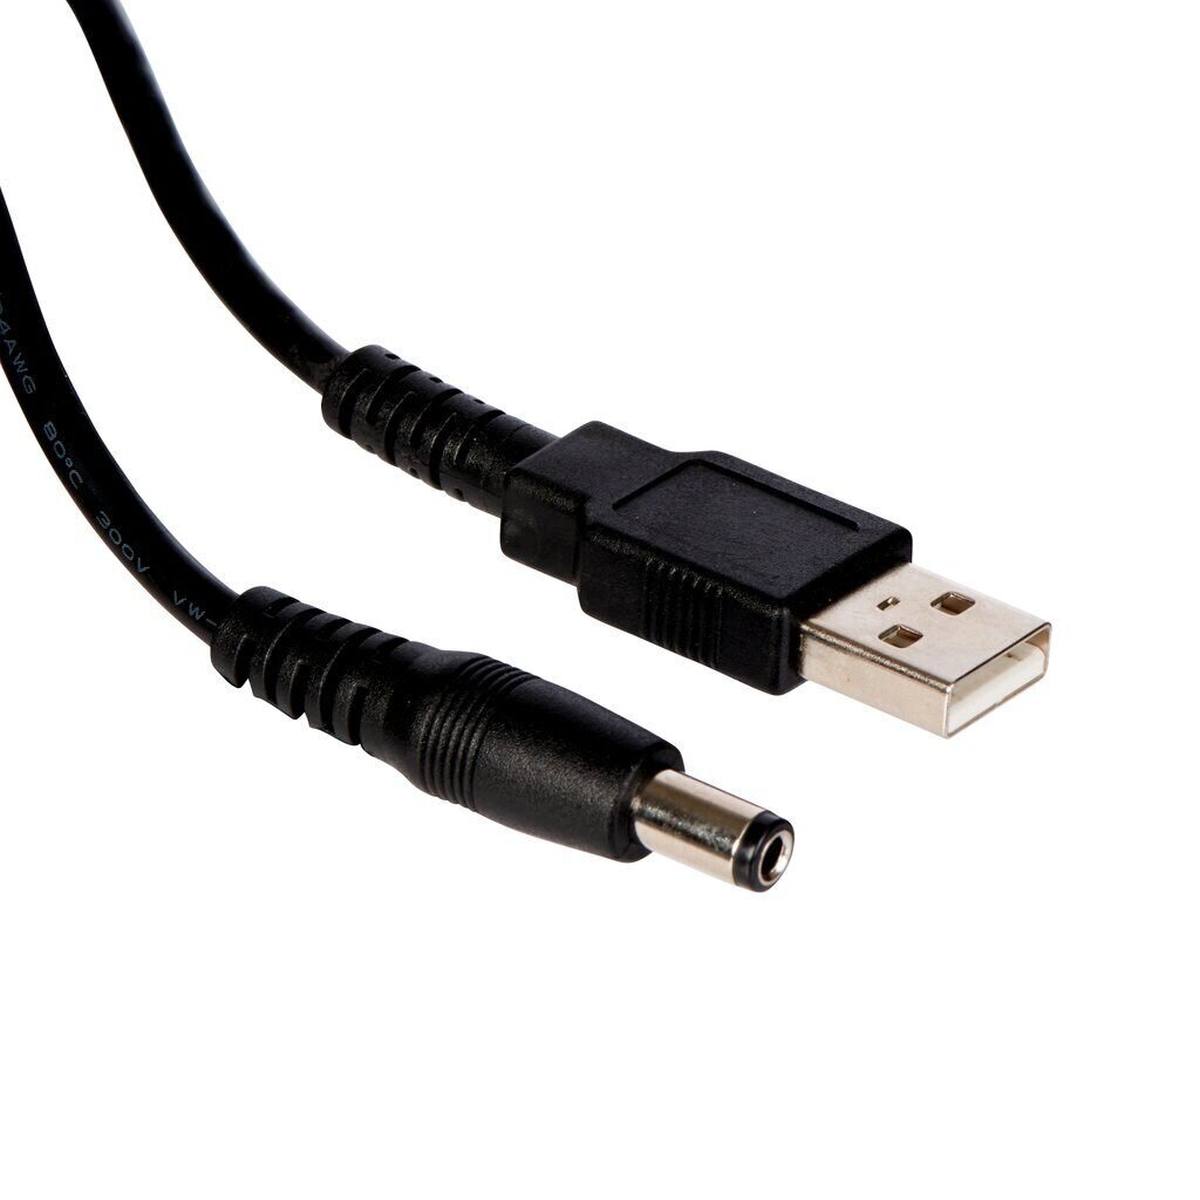 3M PELTOR USB charging cable, FR09